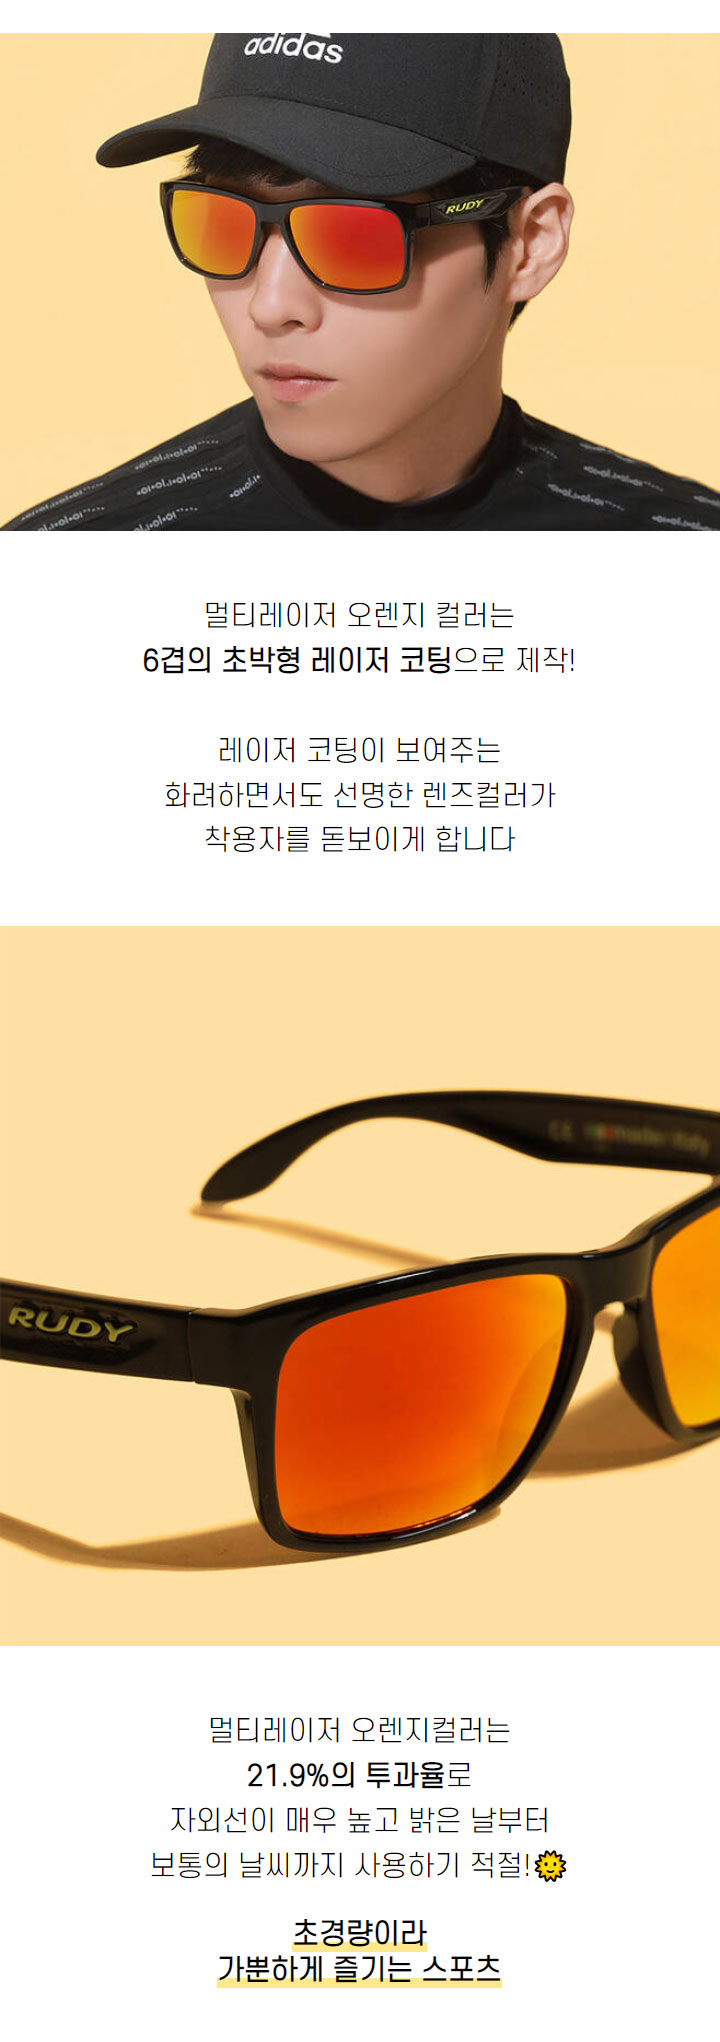 rudyproject_special_edition_sunglasses_22_14.jpg